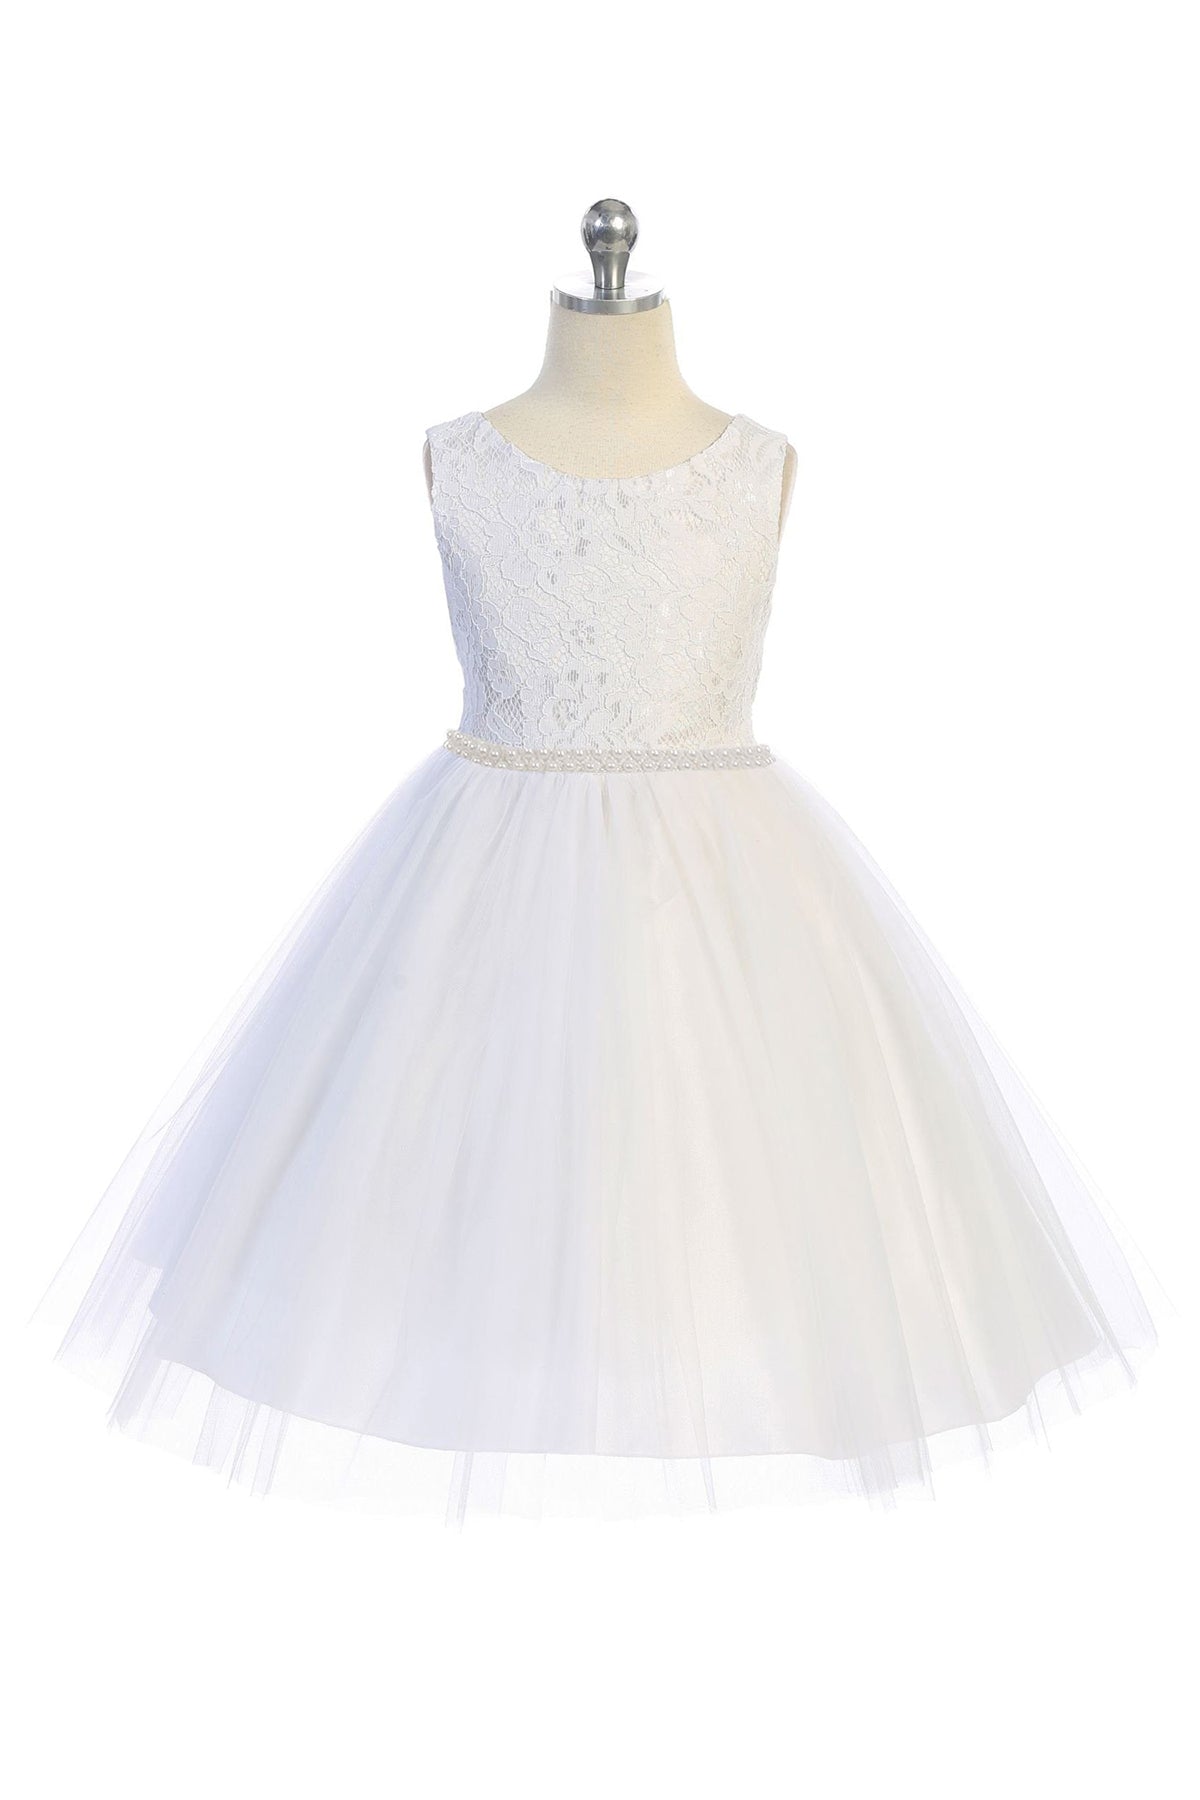 456-C Lace Illusion Girls Dress with Thick Pearl Trim